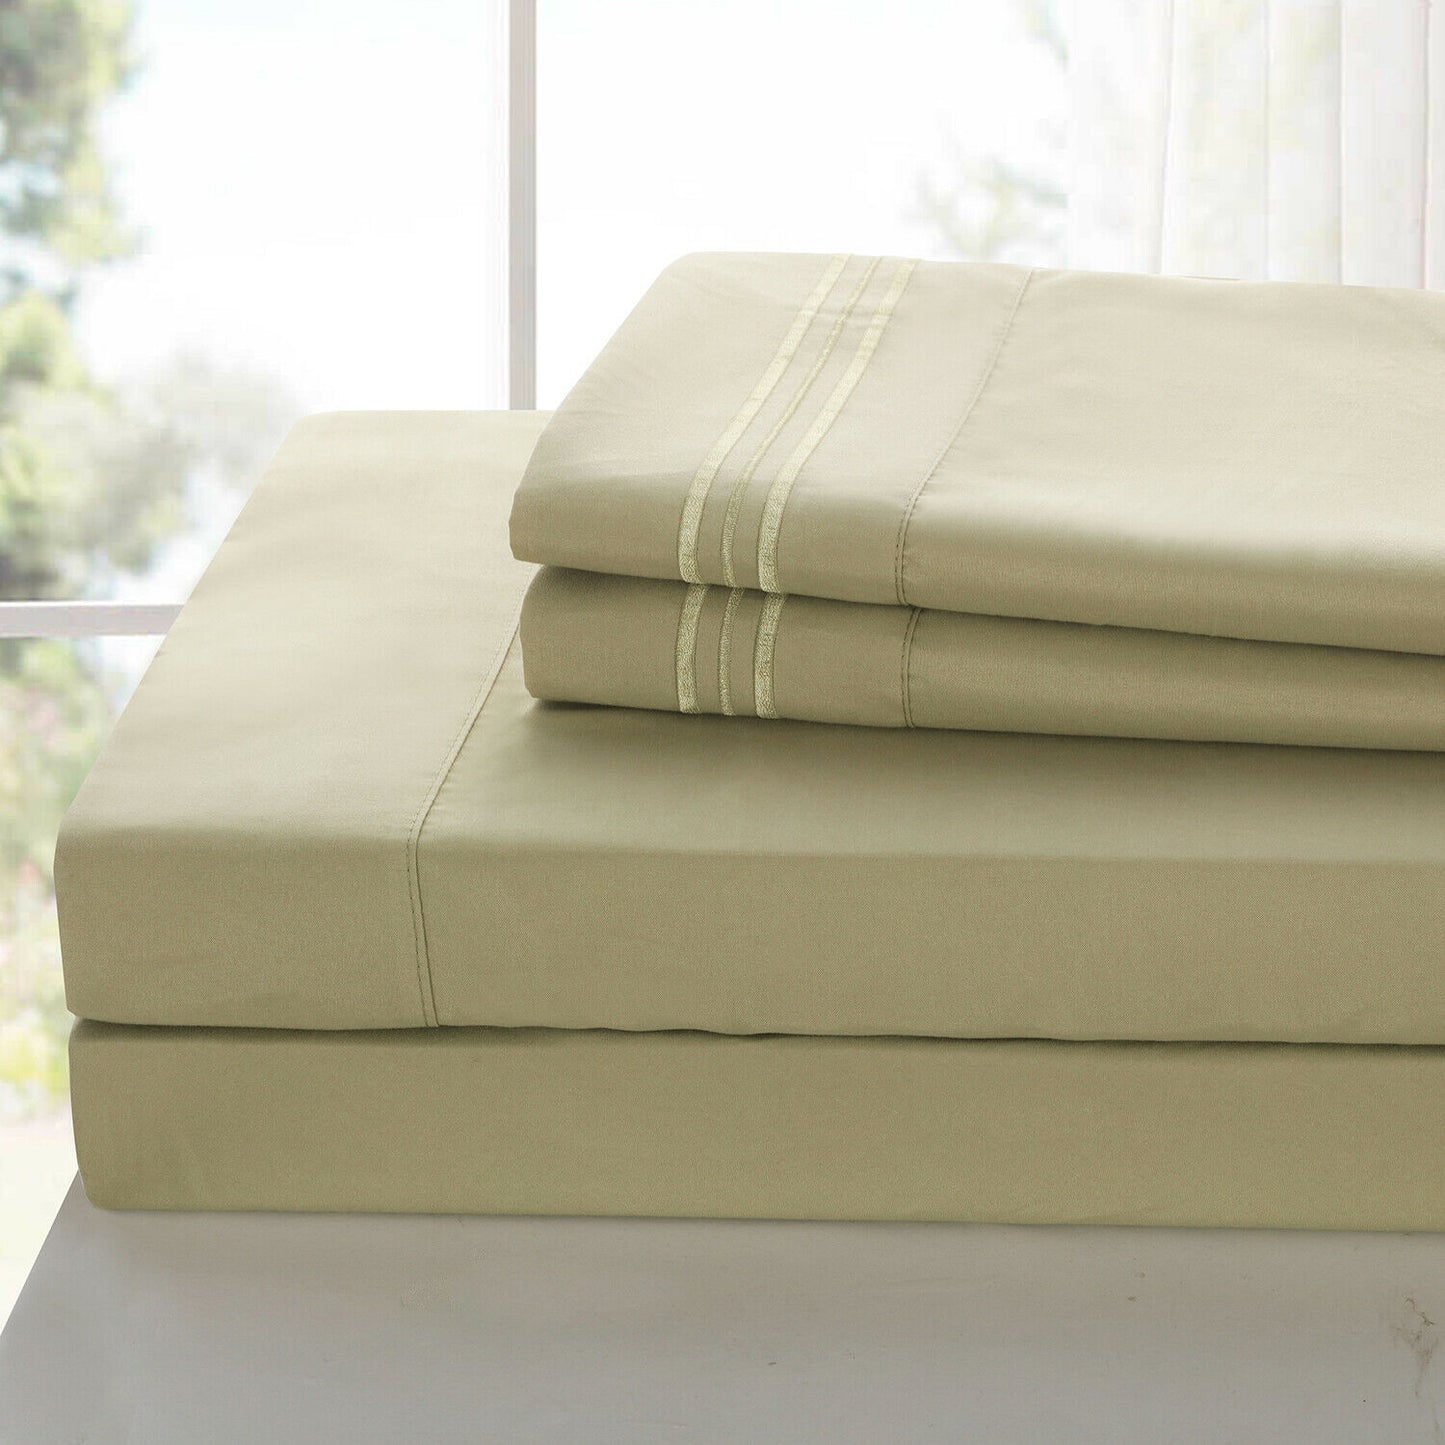 Luxury Ultra-Soft Bed Sheet Set | Hypoallergenic-Deep Pockets-Fade,Wrinkle,Stain Resistant-1800 Thread Count-4 Pieces